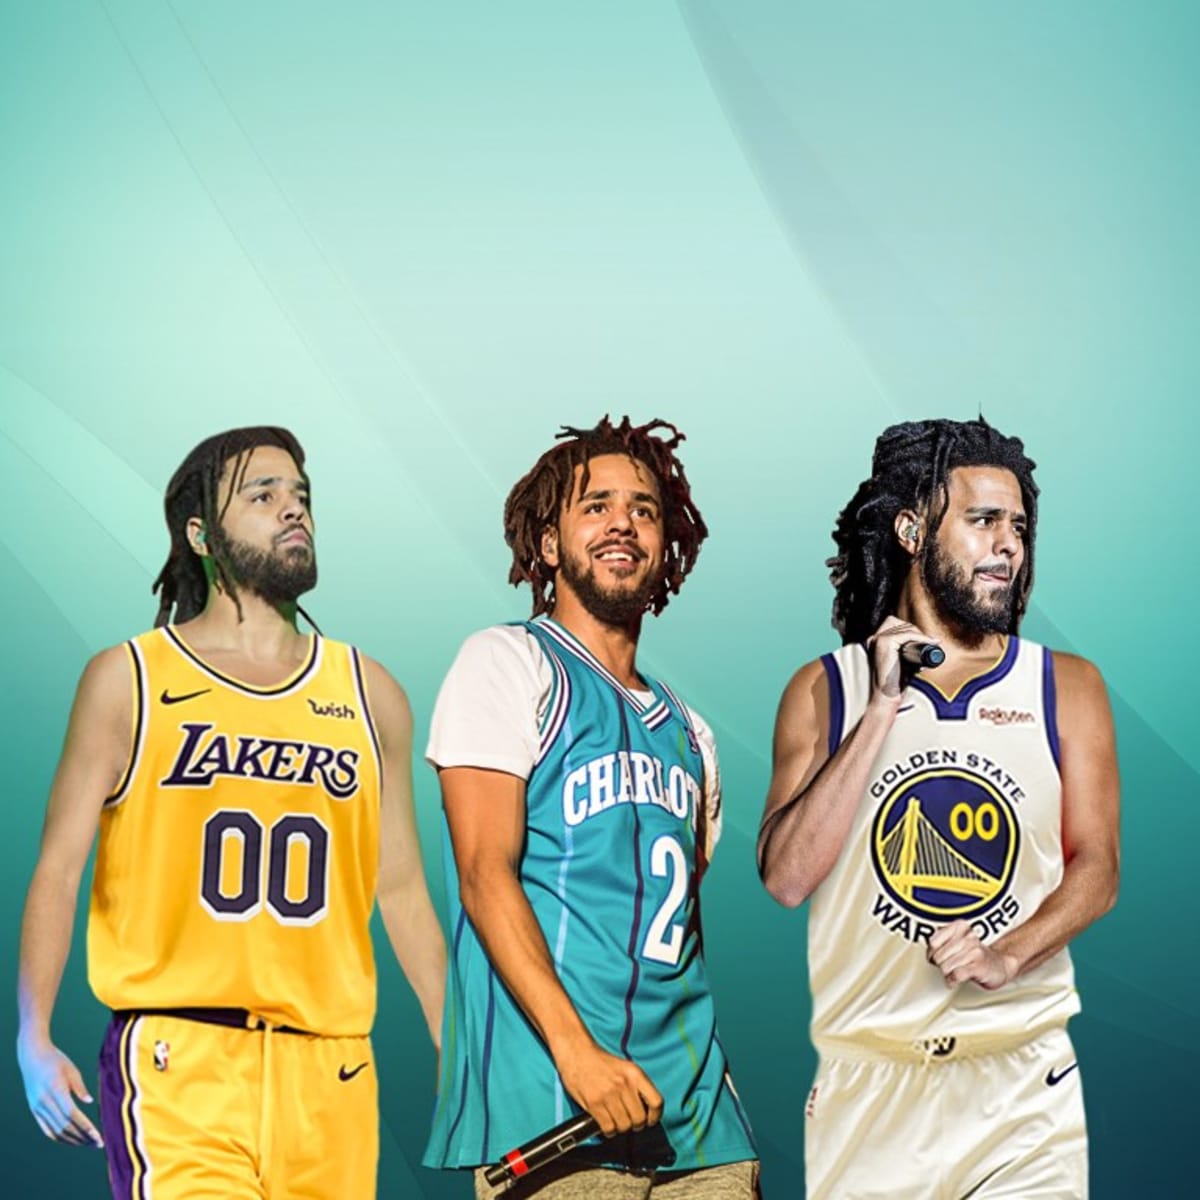 J Cole Basketball Career: Will He Join The NBA?